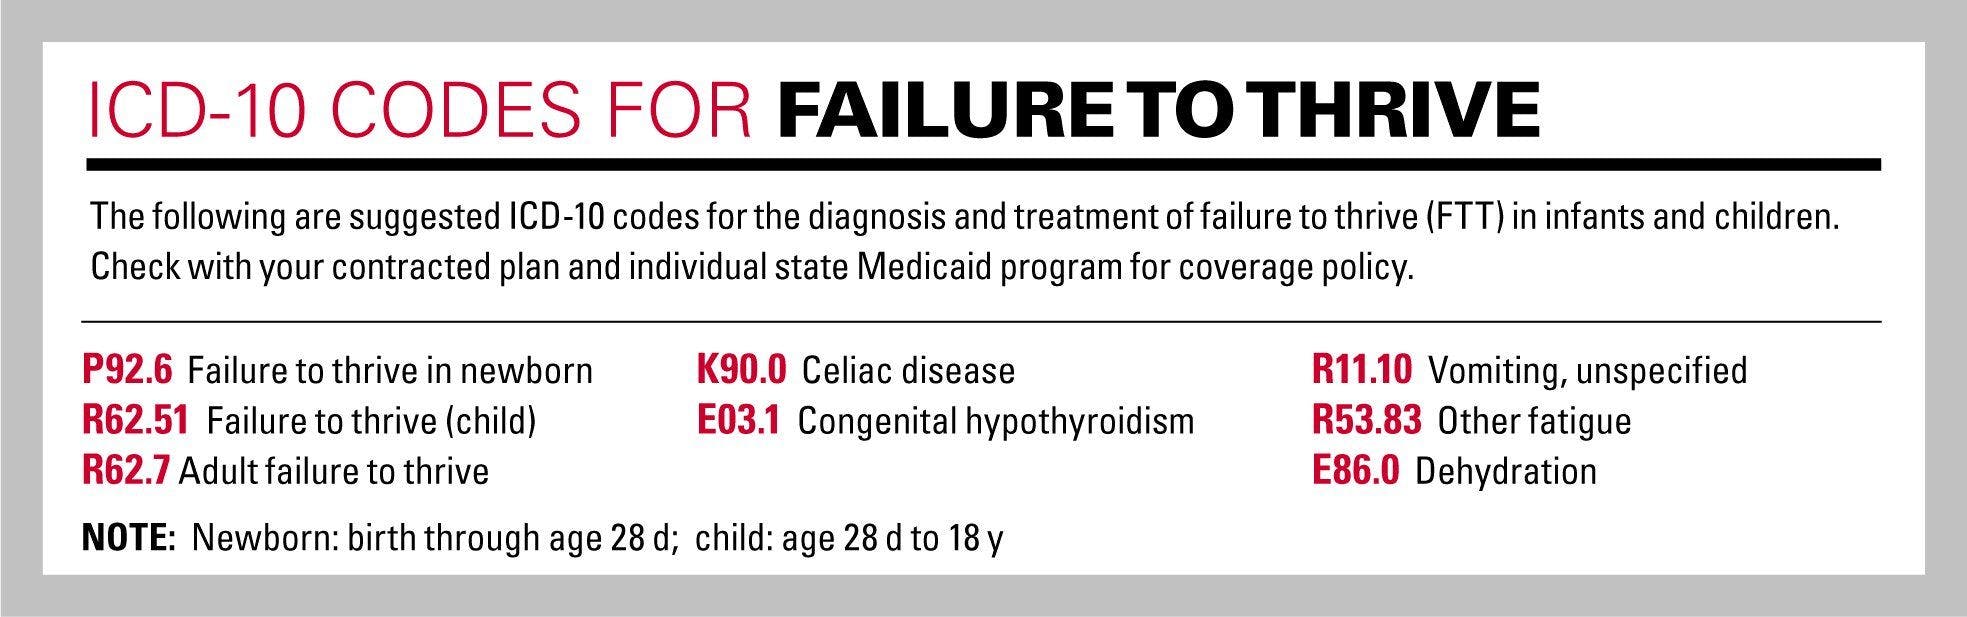 ICD-10 codes for failure to thrive